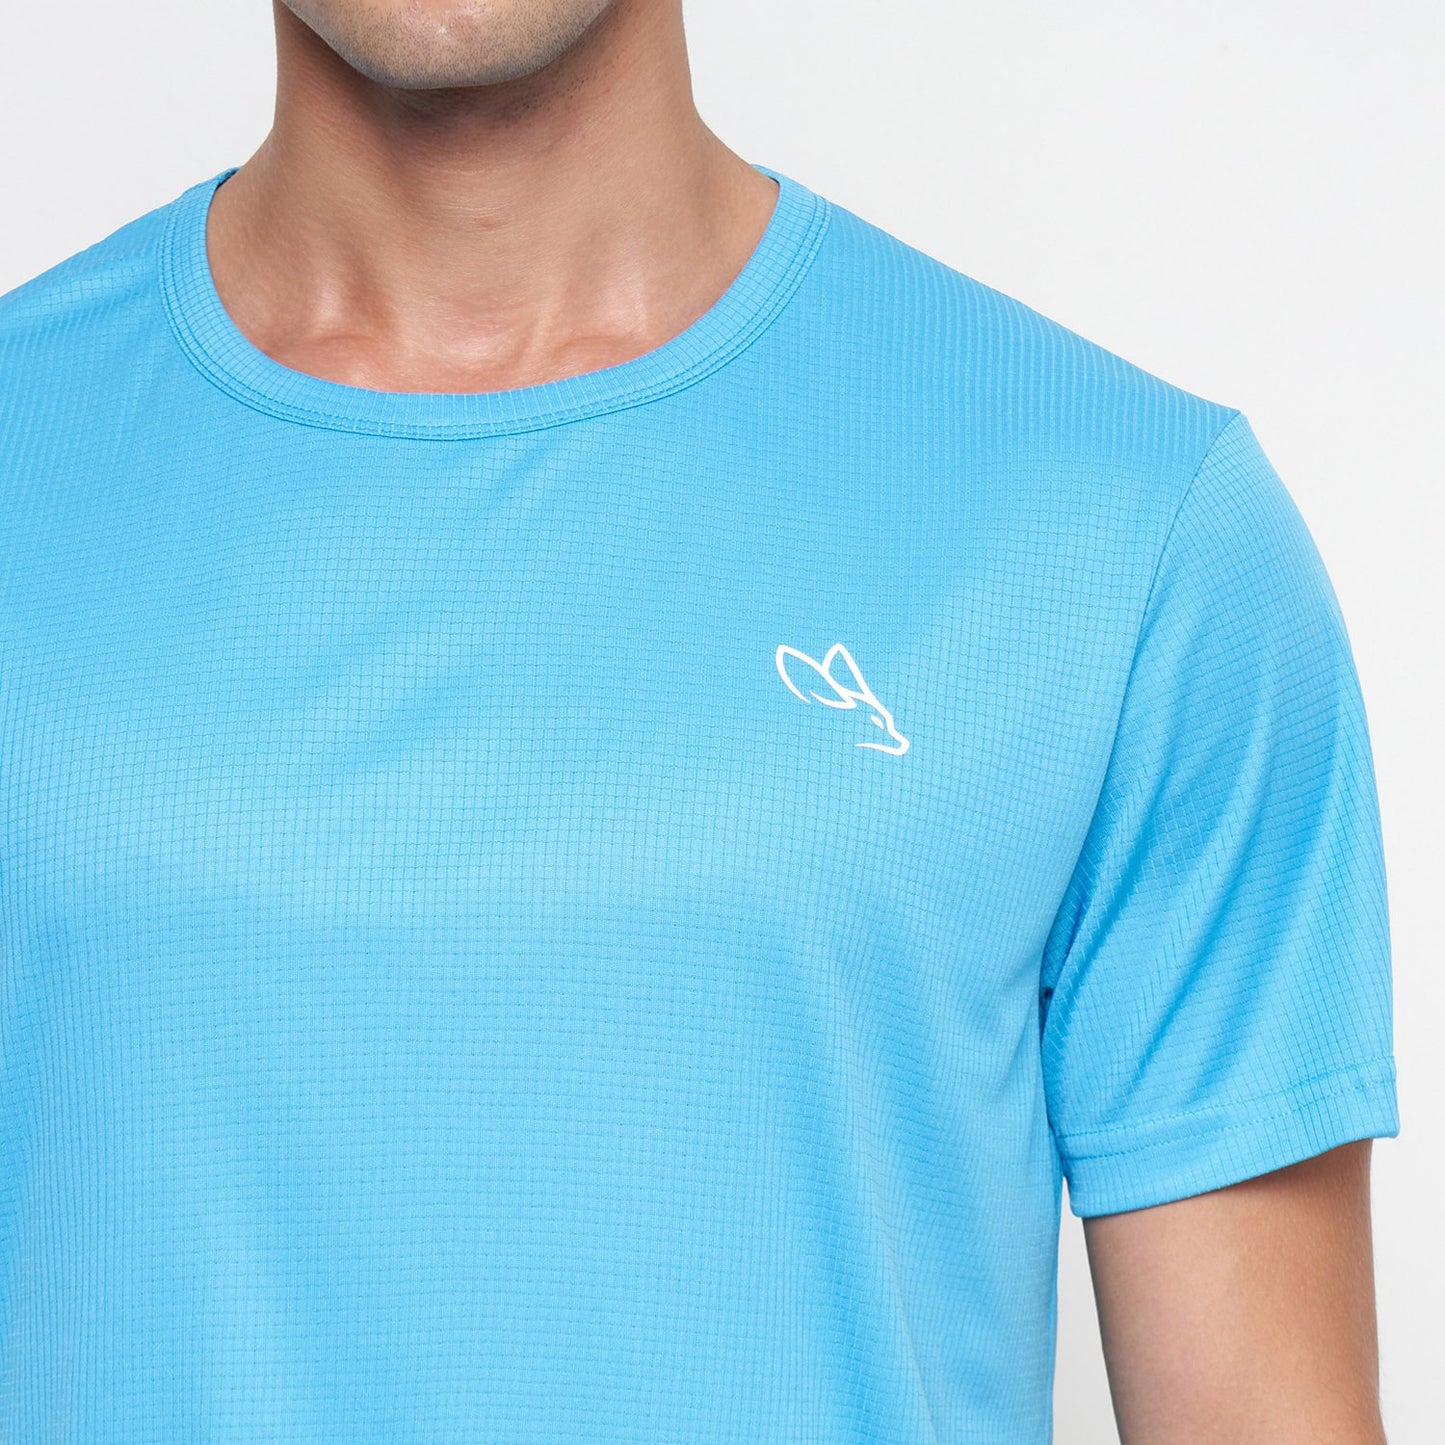 Essential Performance Top